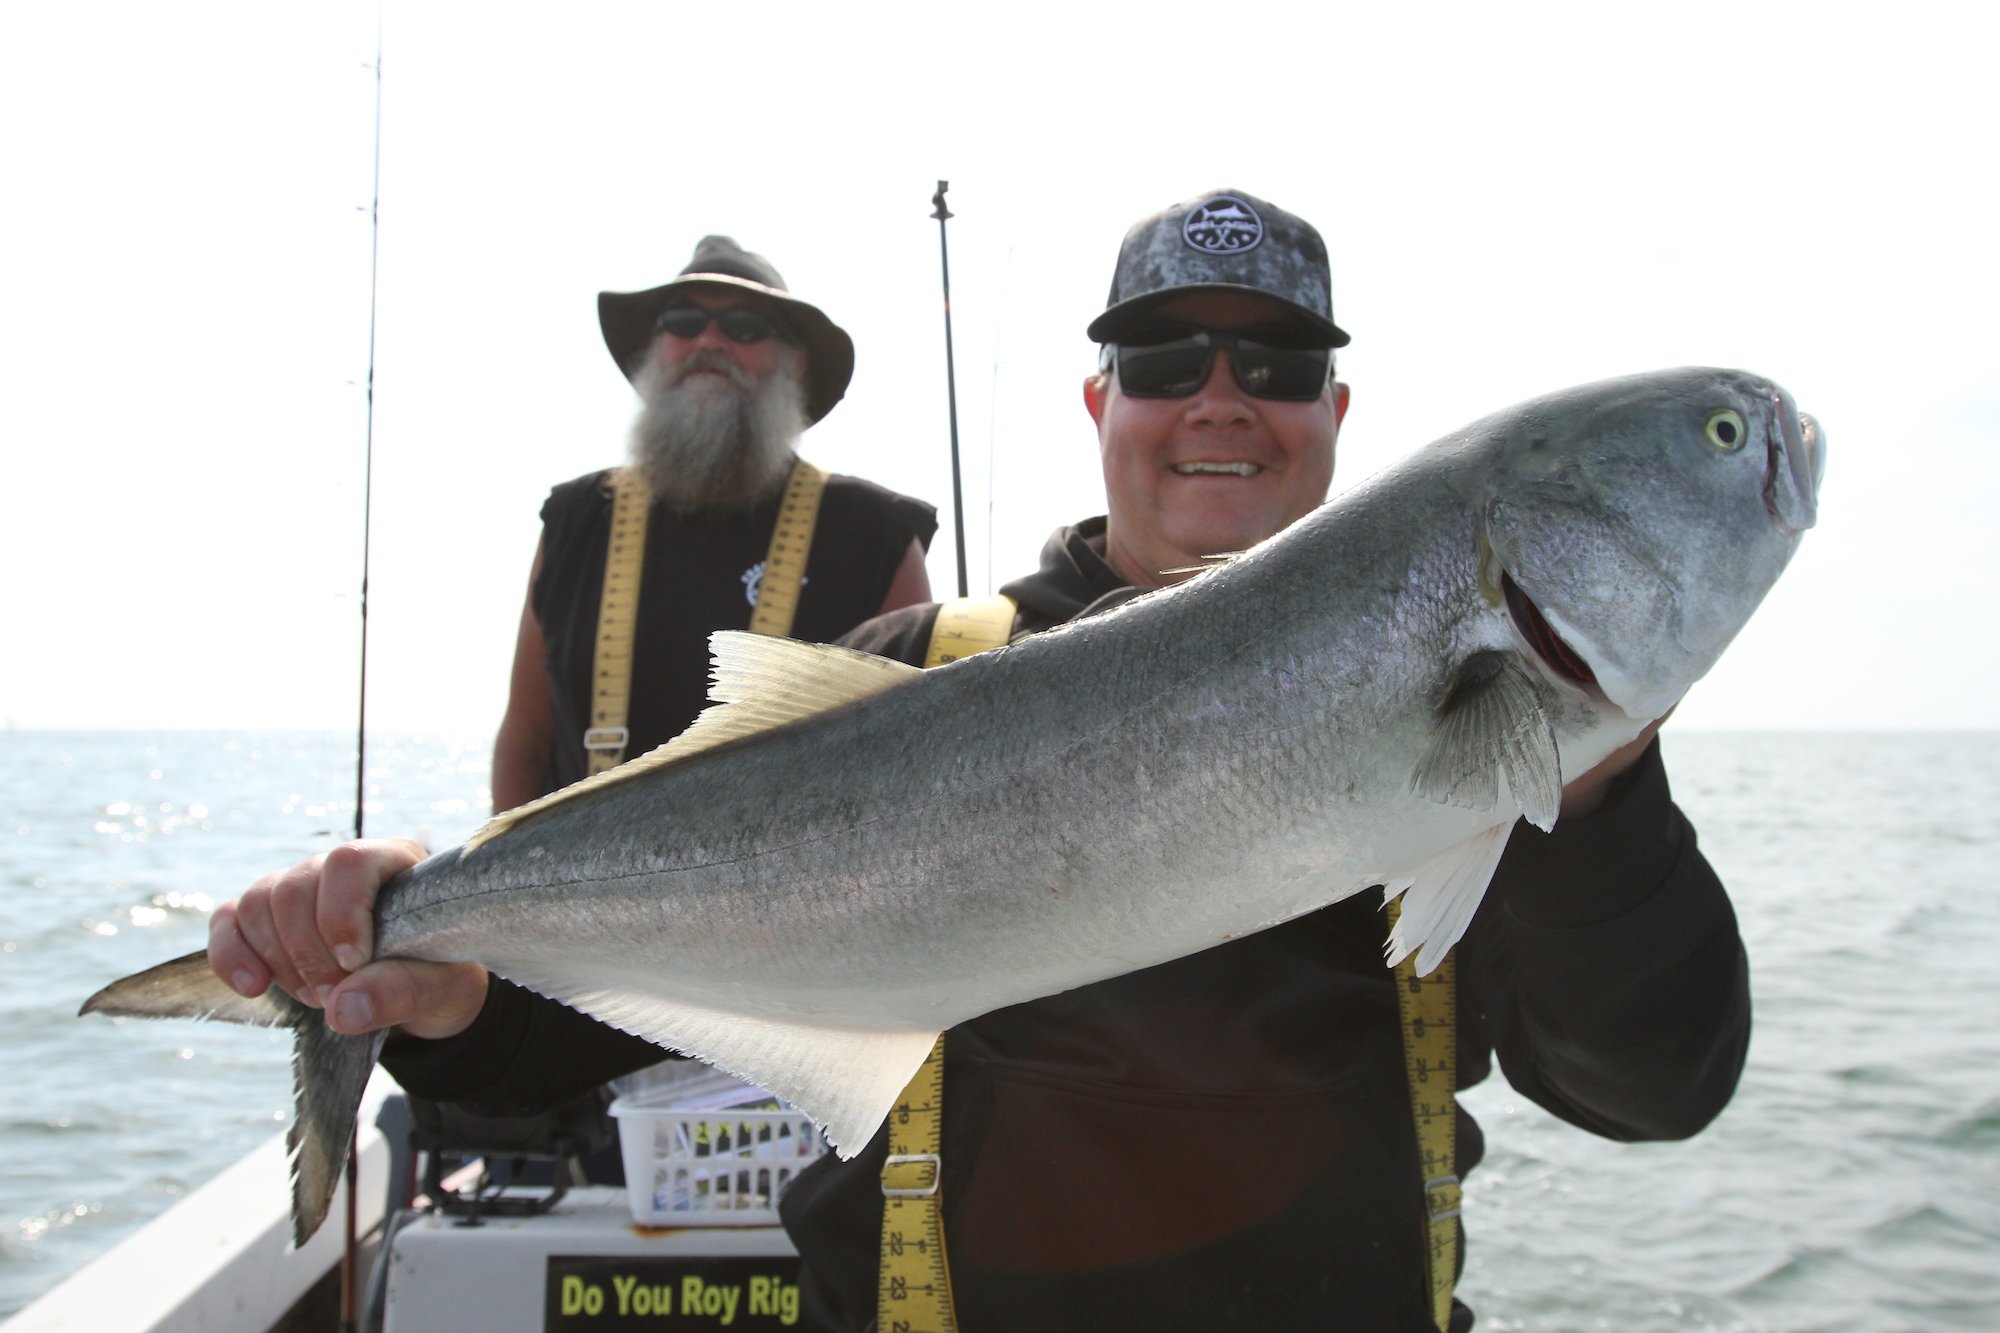 Fishing for Beginners: How to Fish for Bluefish